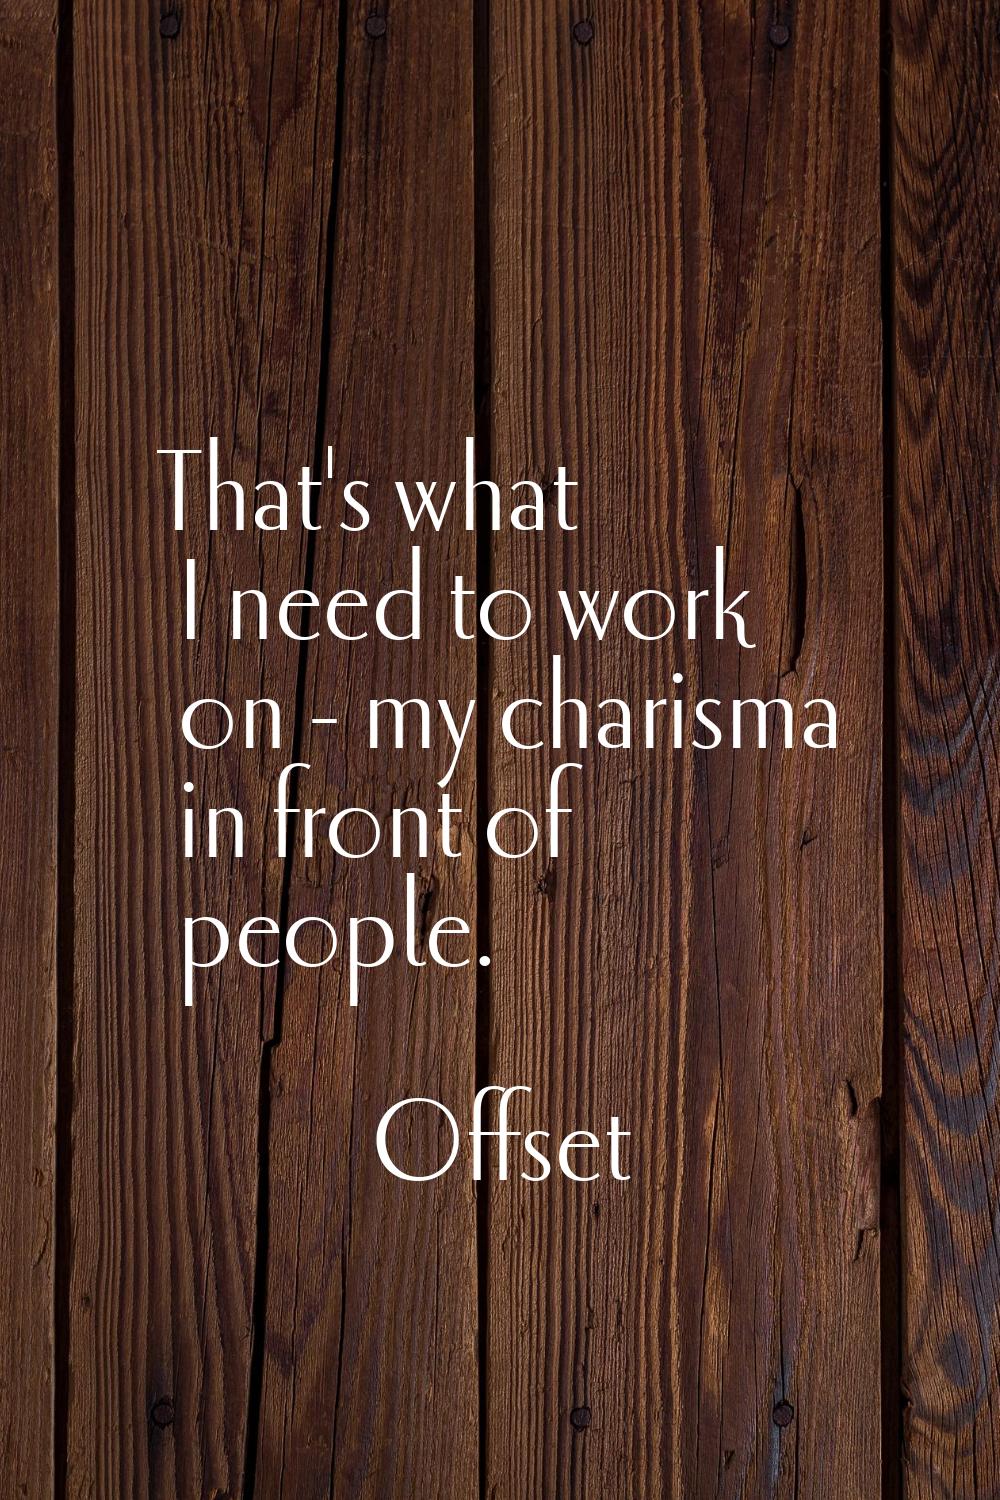 That's what I need to work on - my charisma in front of people.